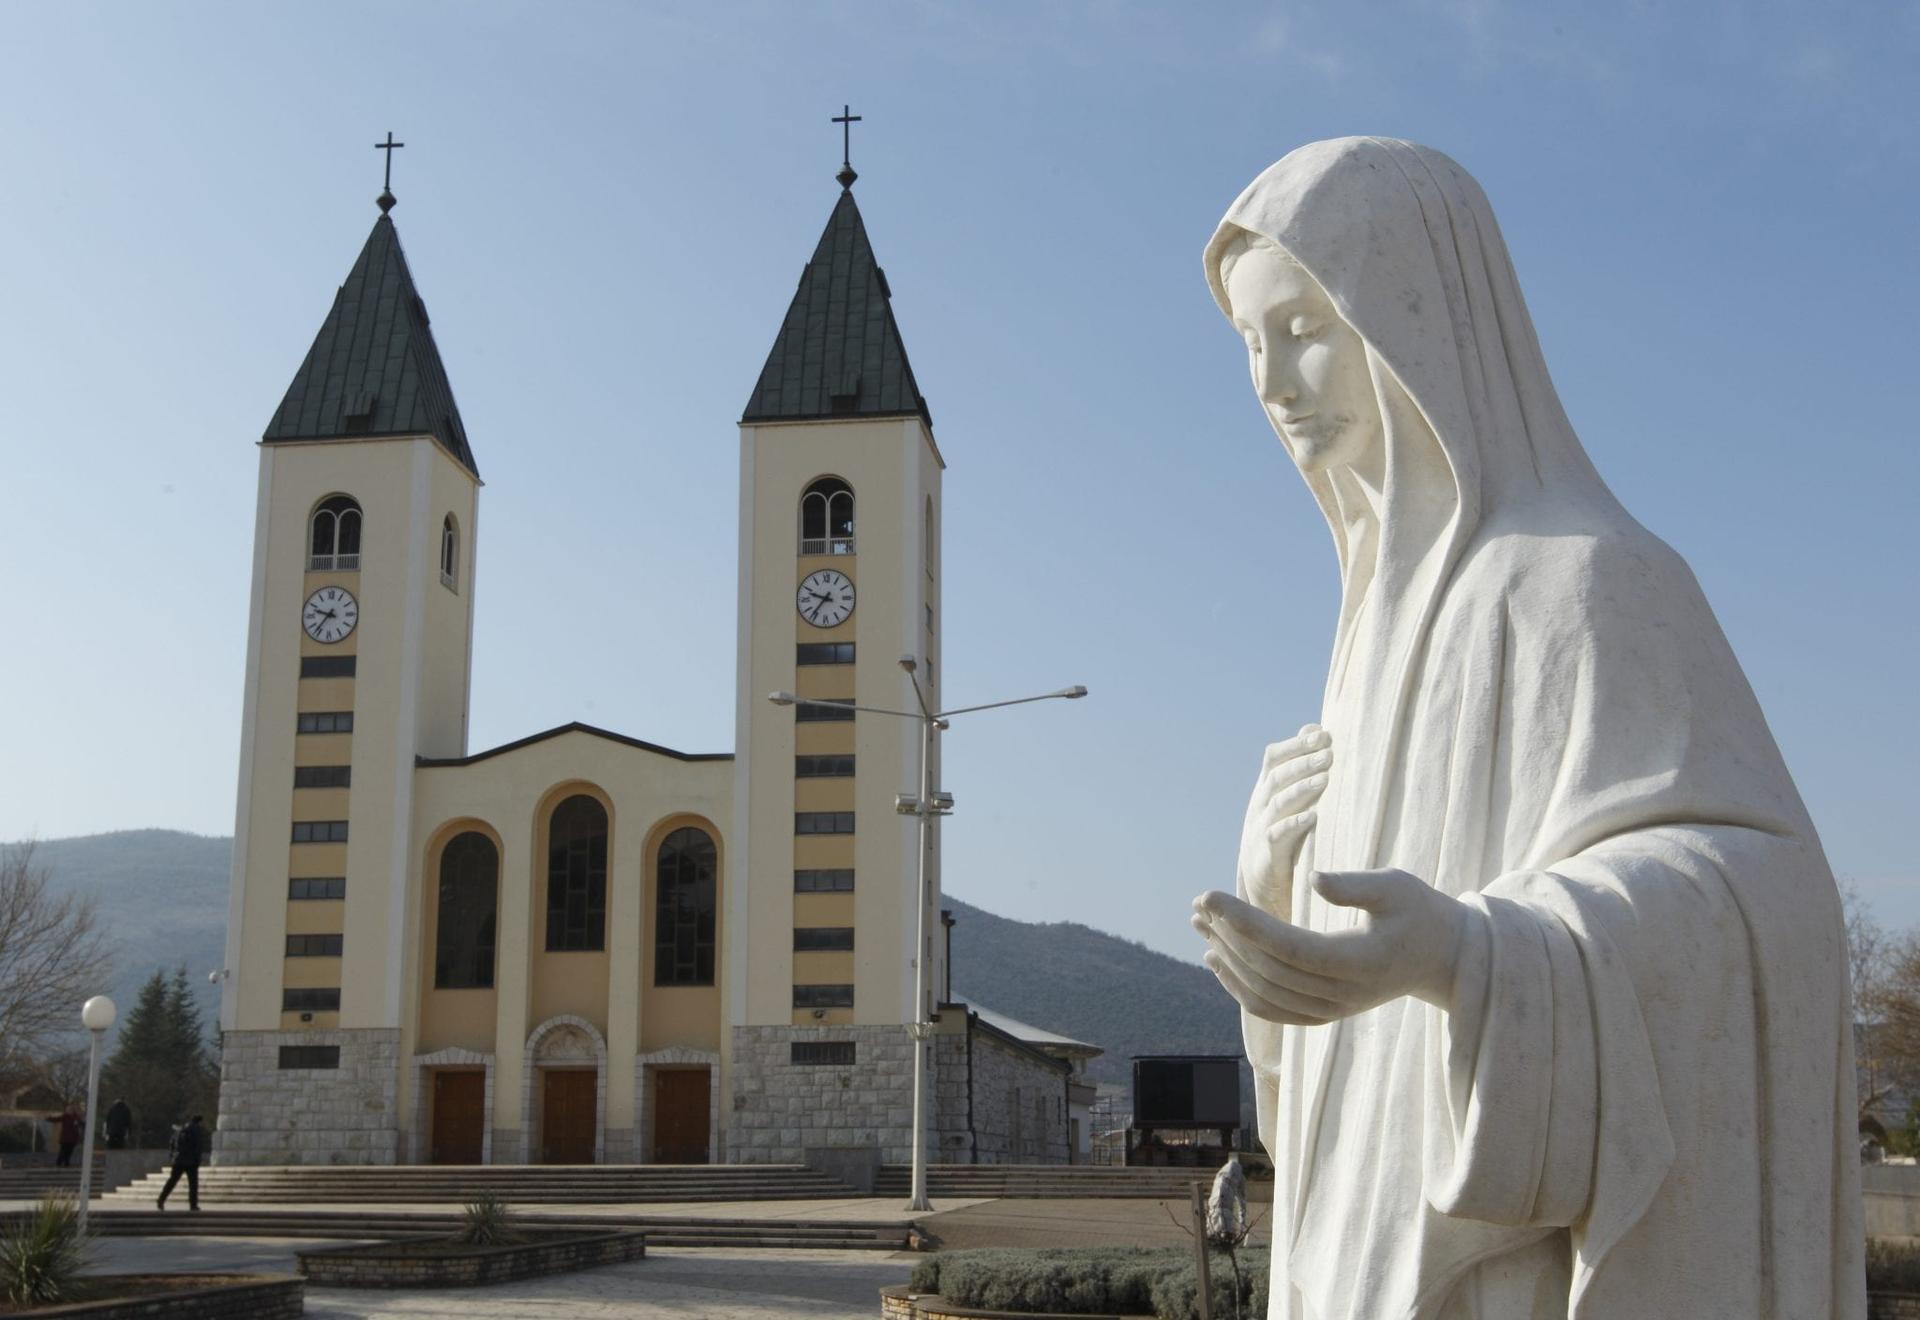 Papal envoy compares Medjugorje to Fatima and Lourdes